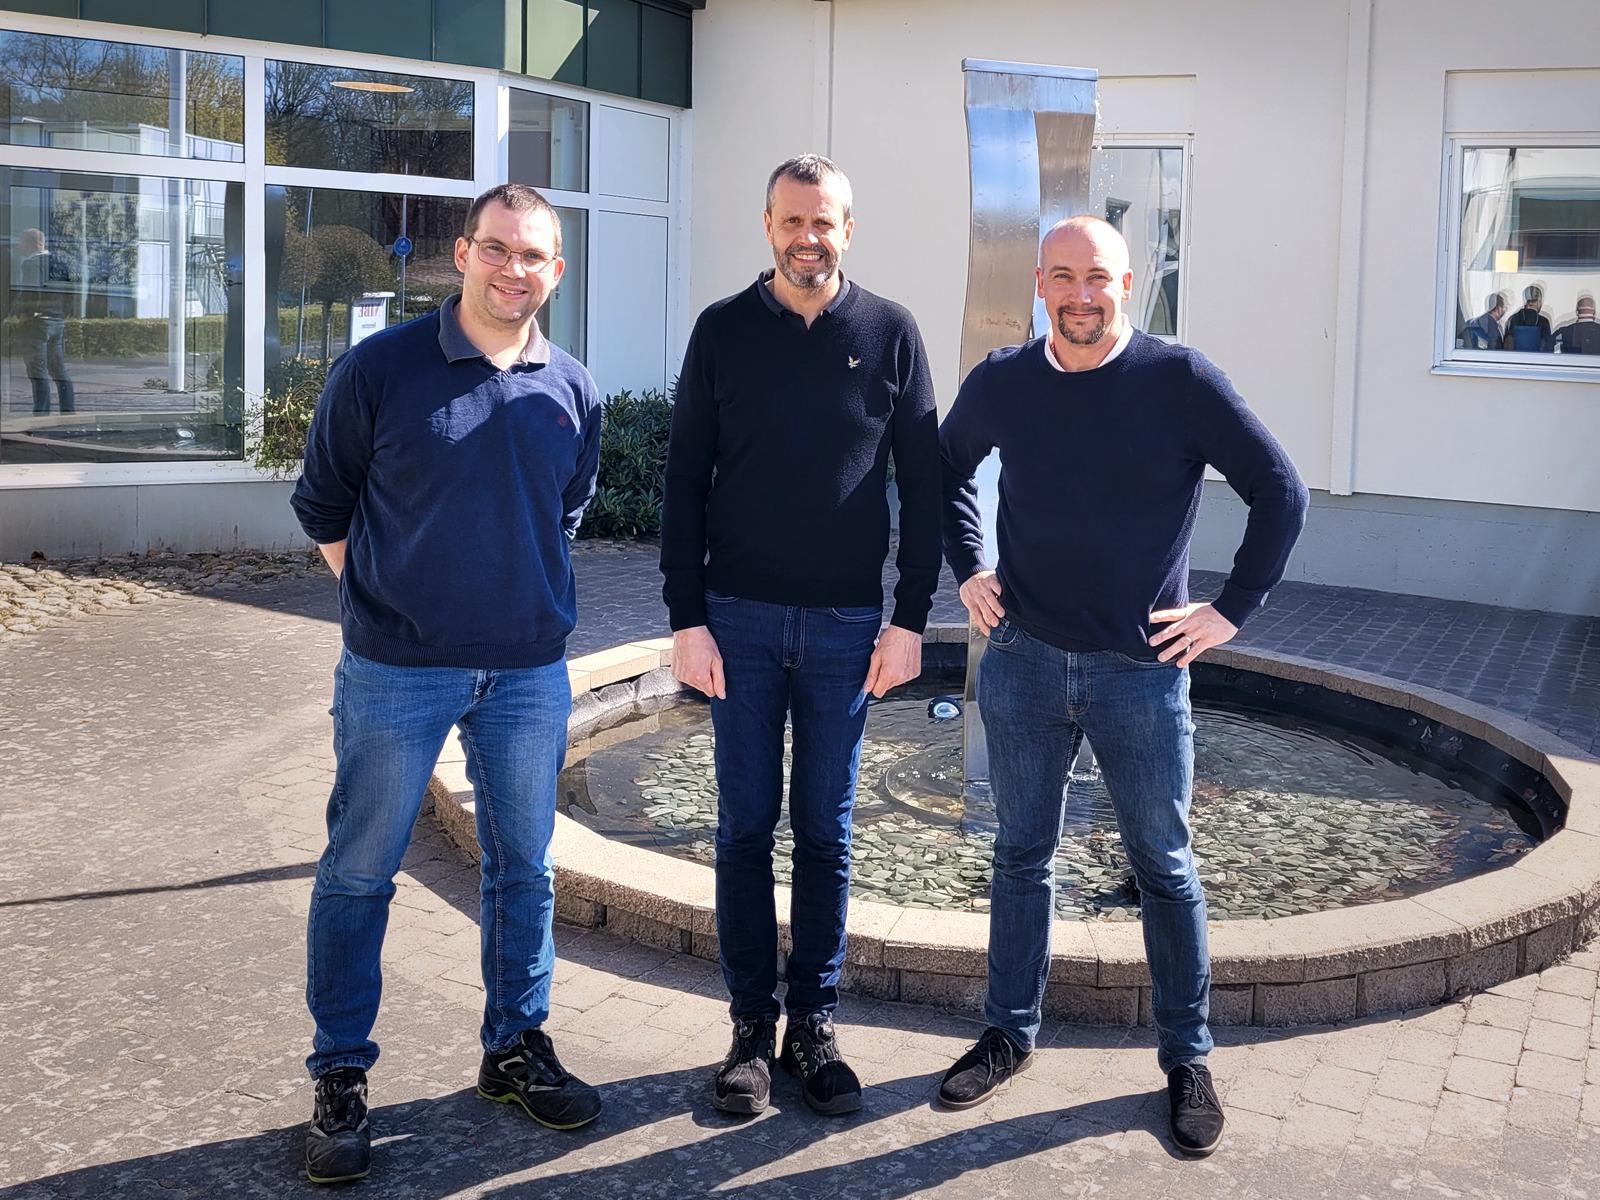 A new production line from AP&T will increase NIBE's manufacturing capacity. From the left, Henrik Broström and Stefan Persson, both from NIBE, together with AP&T's Dan Barvö. 